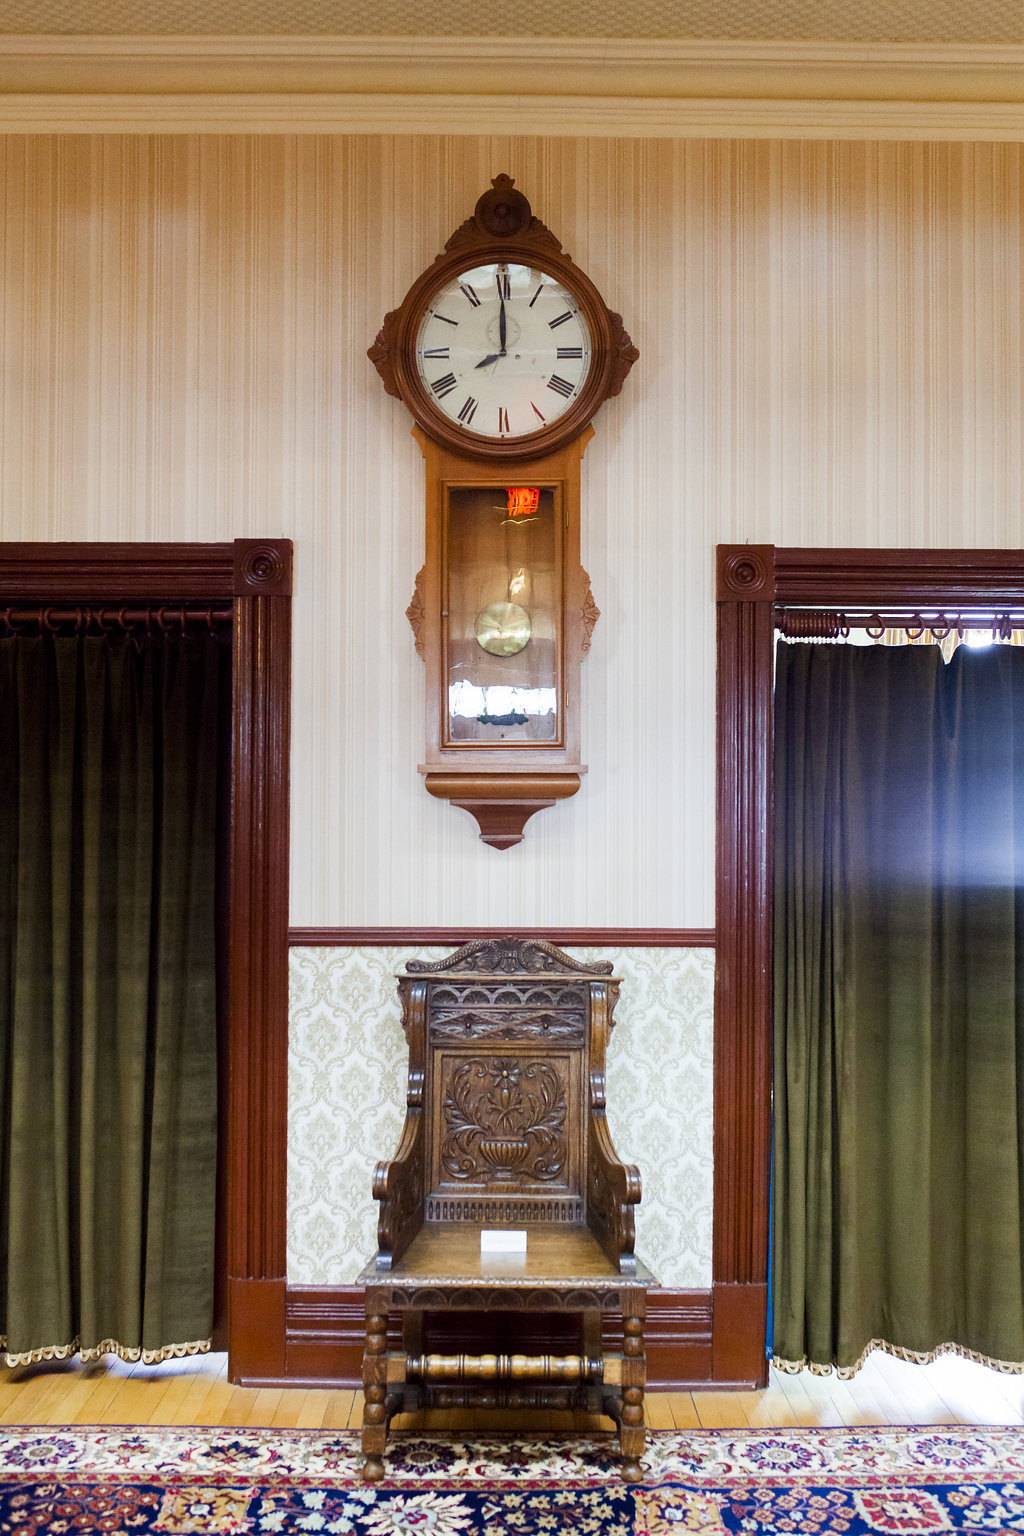 A wooden clock that is original to Government House SK hangs on a wall above a wooden chair in the main hall of the museum